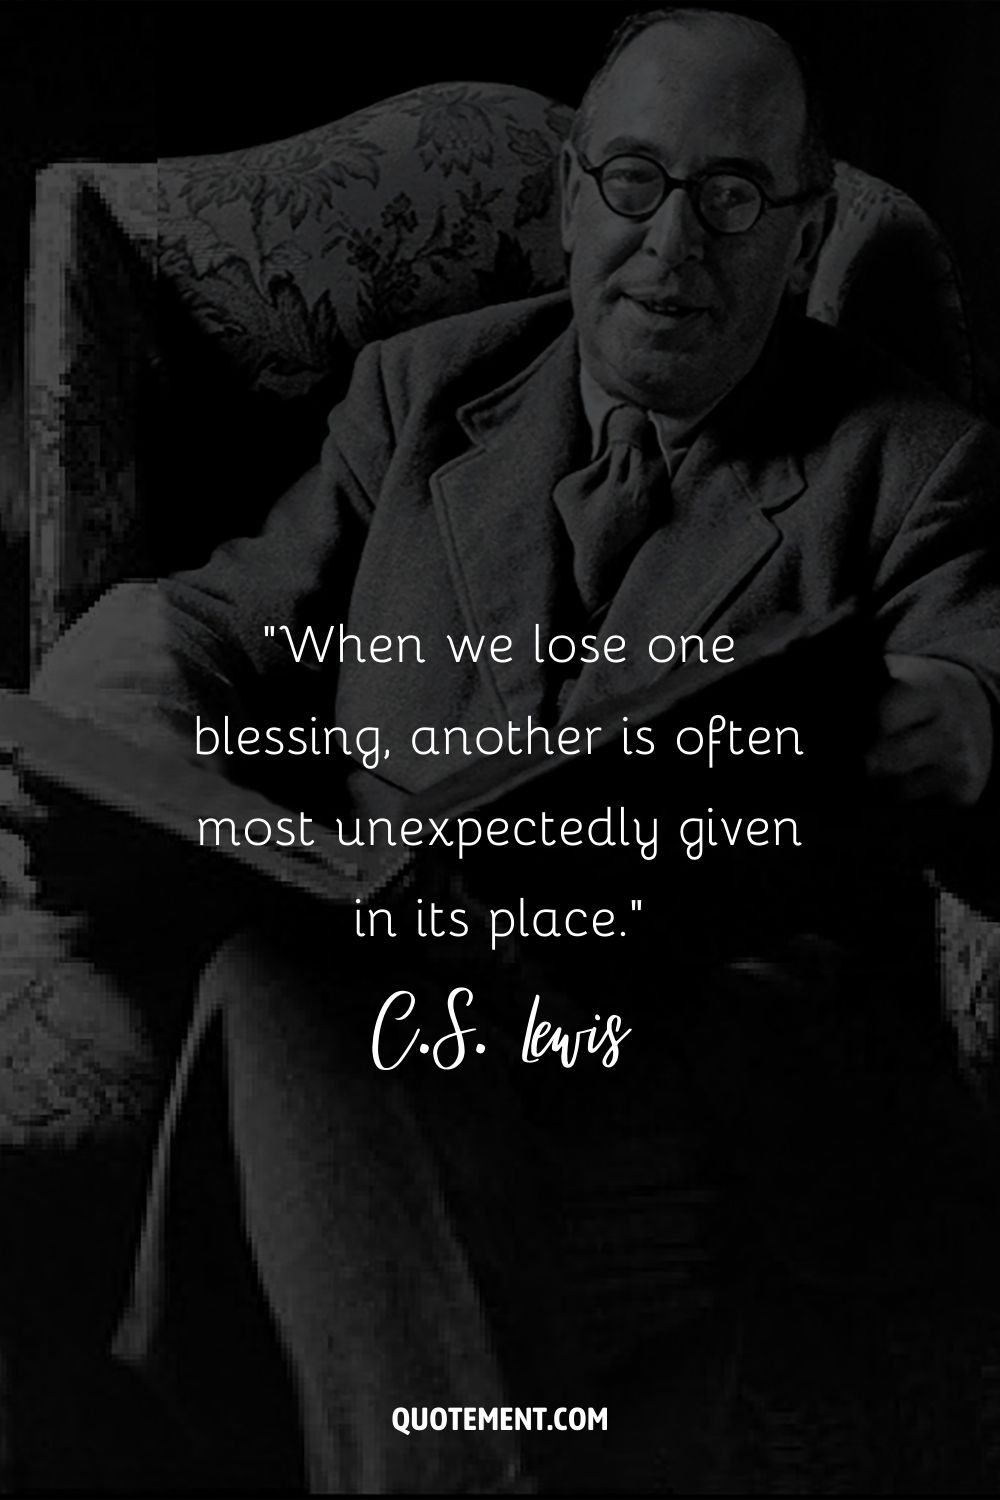 seated in a chair, C.S. Lewis smiles gently while holding a book